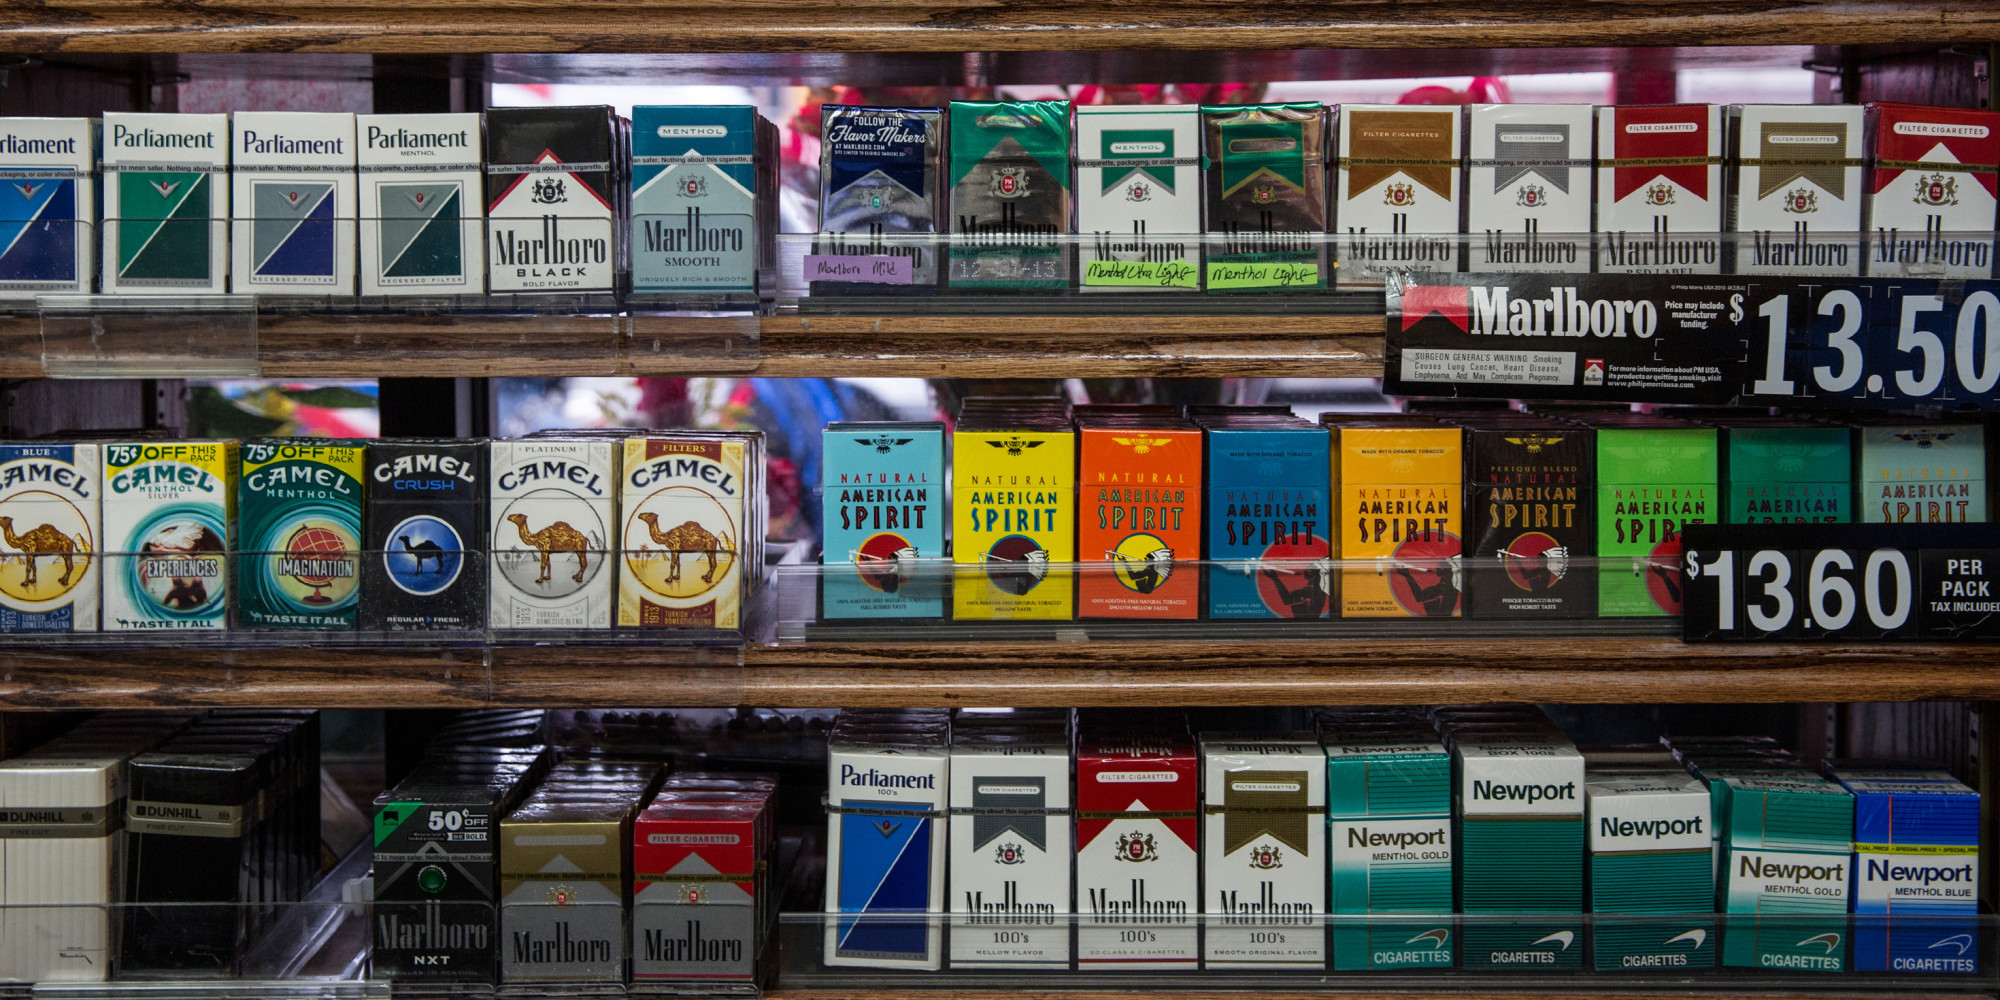 You Now Have To Be 21 Years Old To Buy Cigarettes In New York City